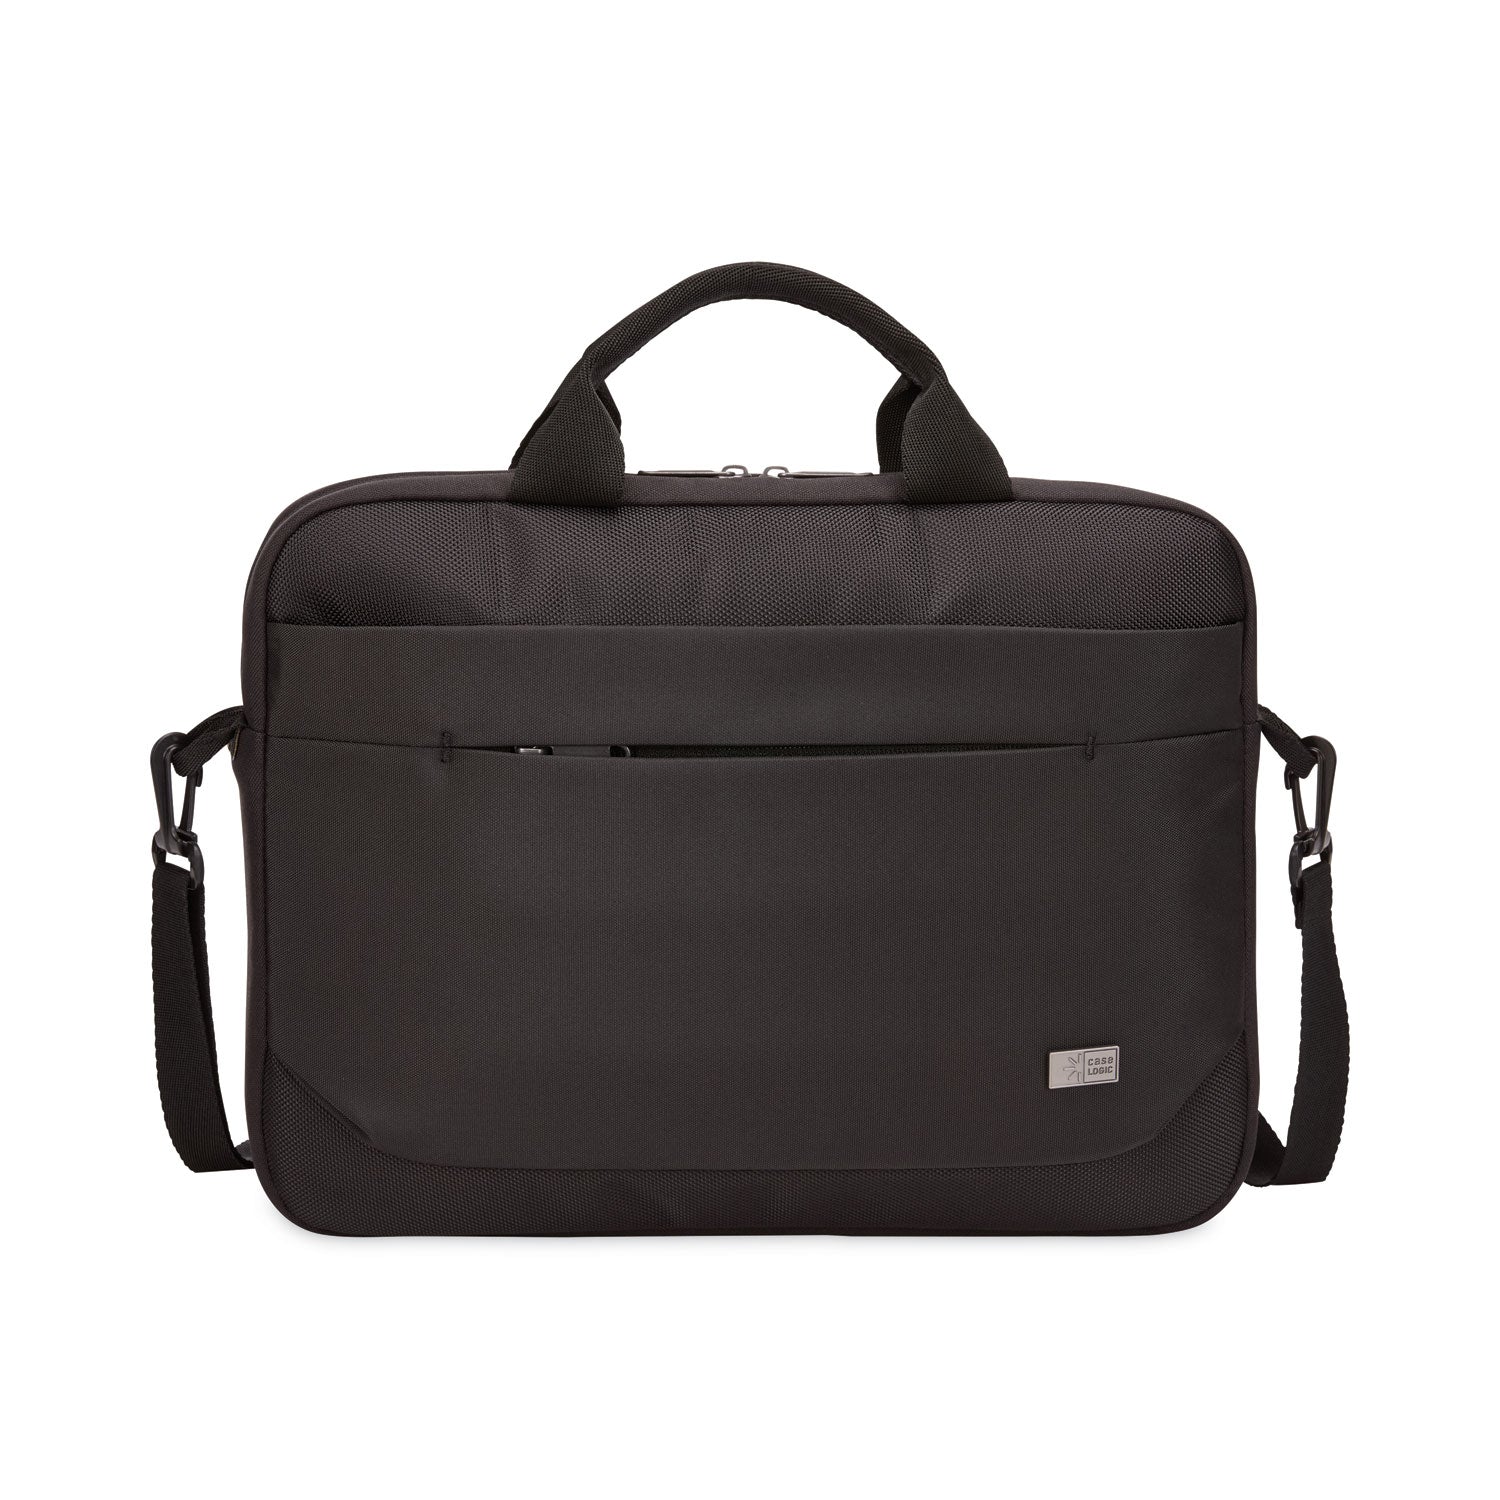 advantage-laptop-attache-fits-devices-up-to-14-polyester-146-x-28-x-13-black_clg3203986 - 1